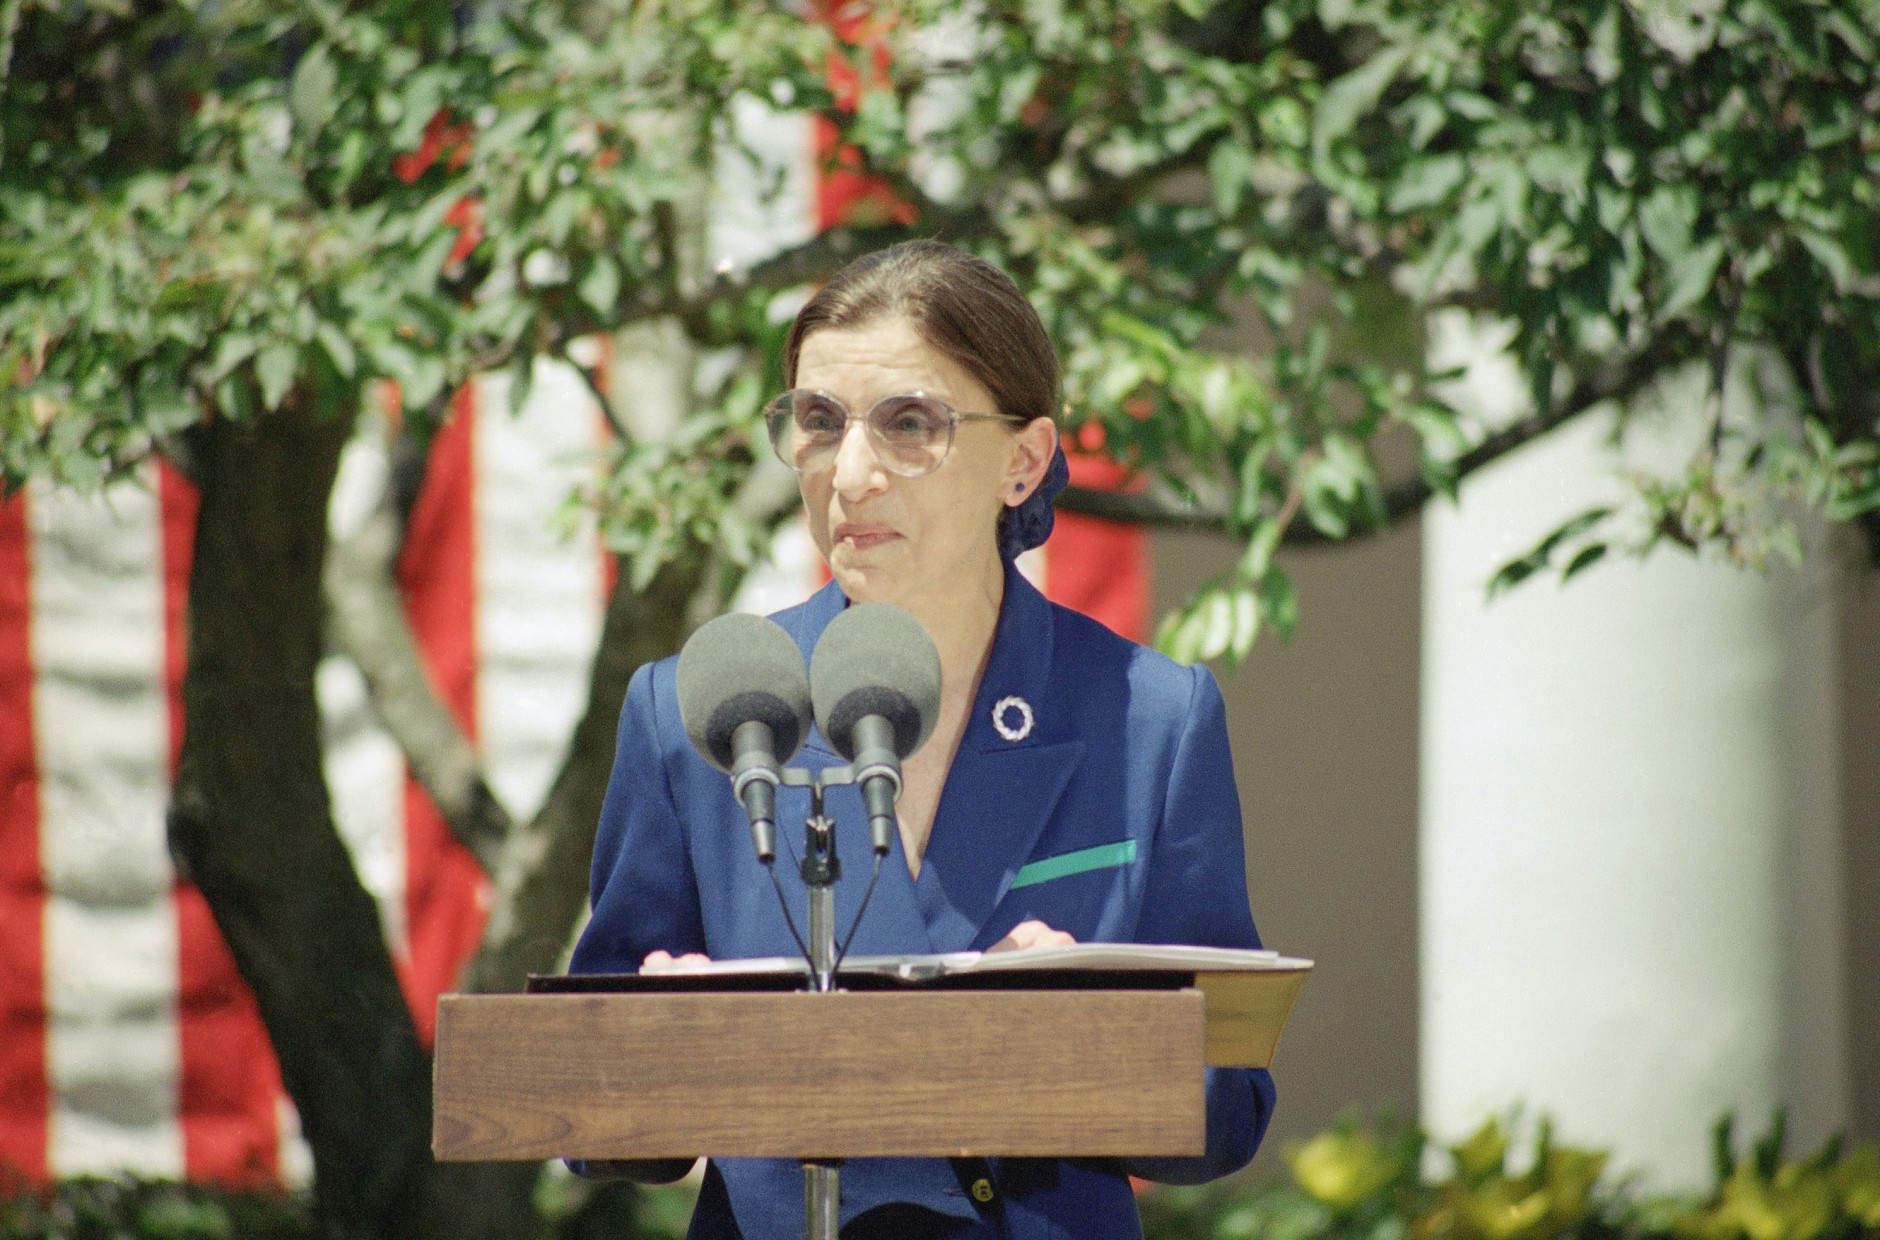 On this date in 1993, Ruth Bader Ginsburg was sworn in as the second female justice on the U.S. Supreme Court. Here, she addresses reporters in the Rose Garden of the White House on Monday, June 14, 1993. (AP Photo/J. Scott Applewhite)